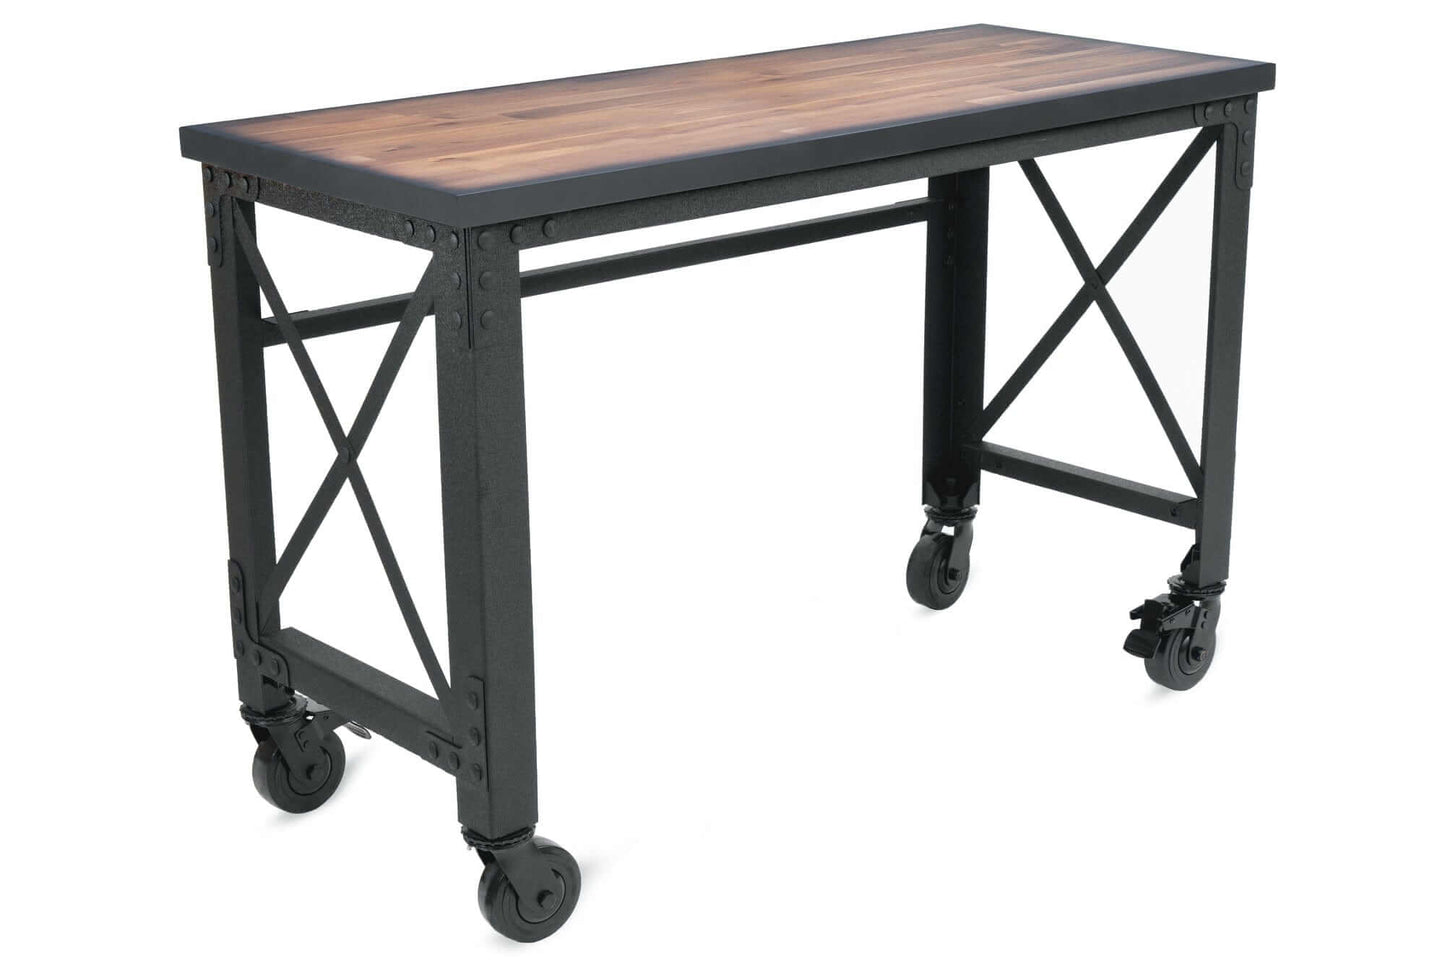 DuraMax 52 In x 24 In Rolling Industrial Worktable Desk with solid wood top